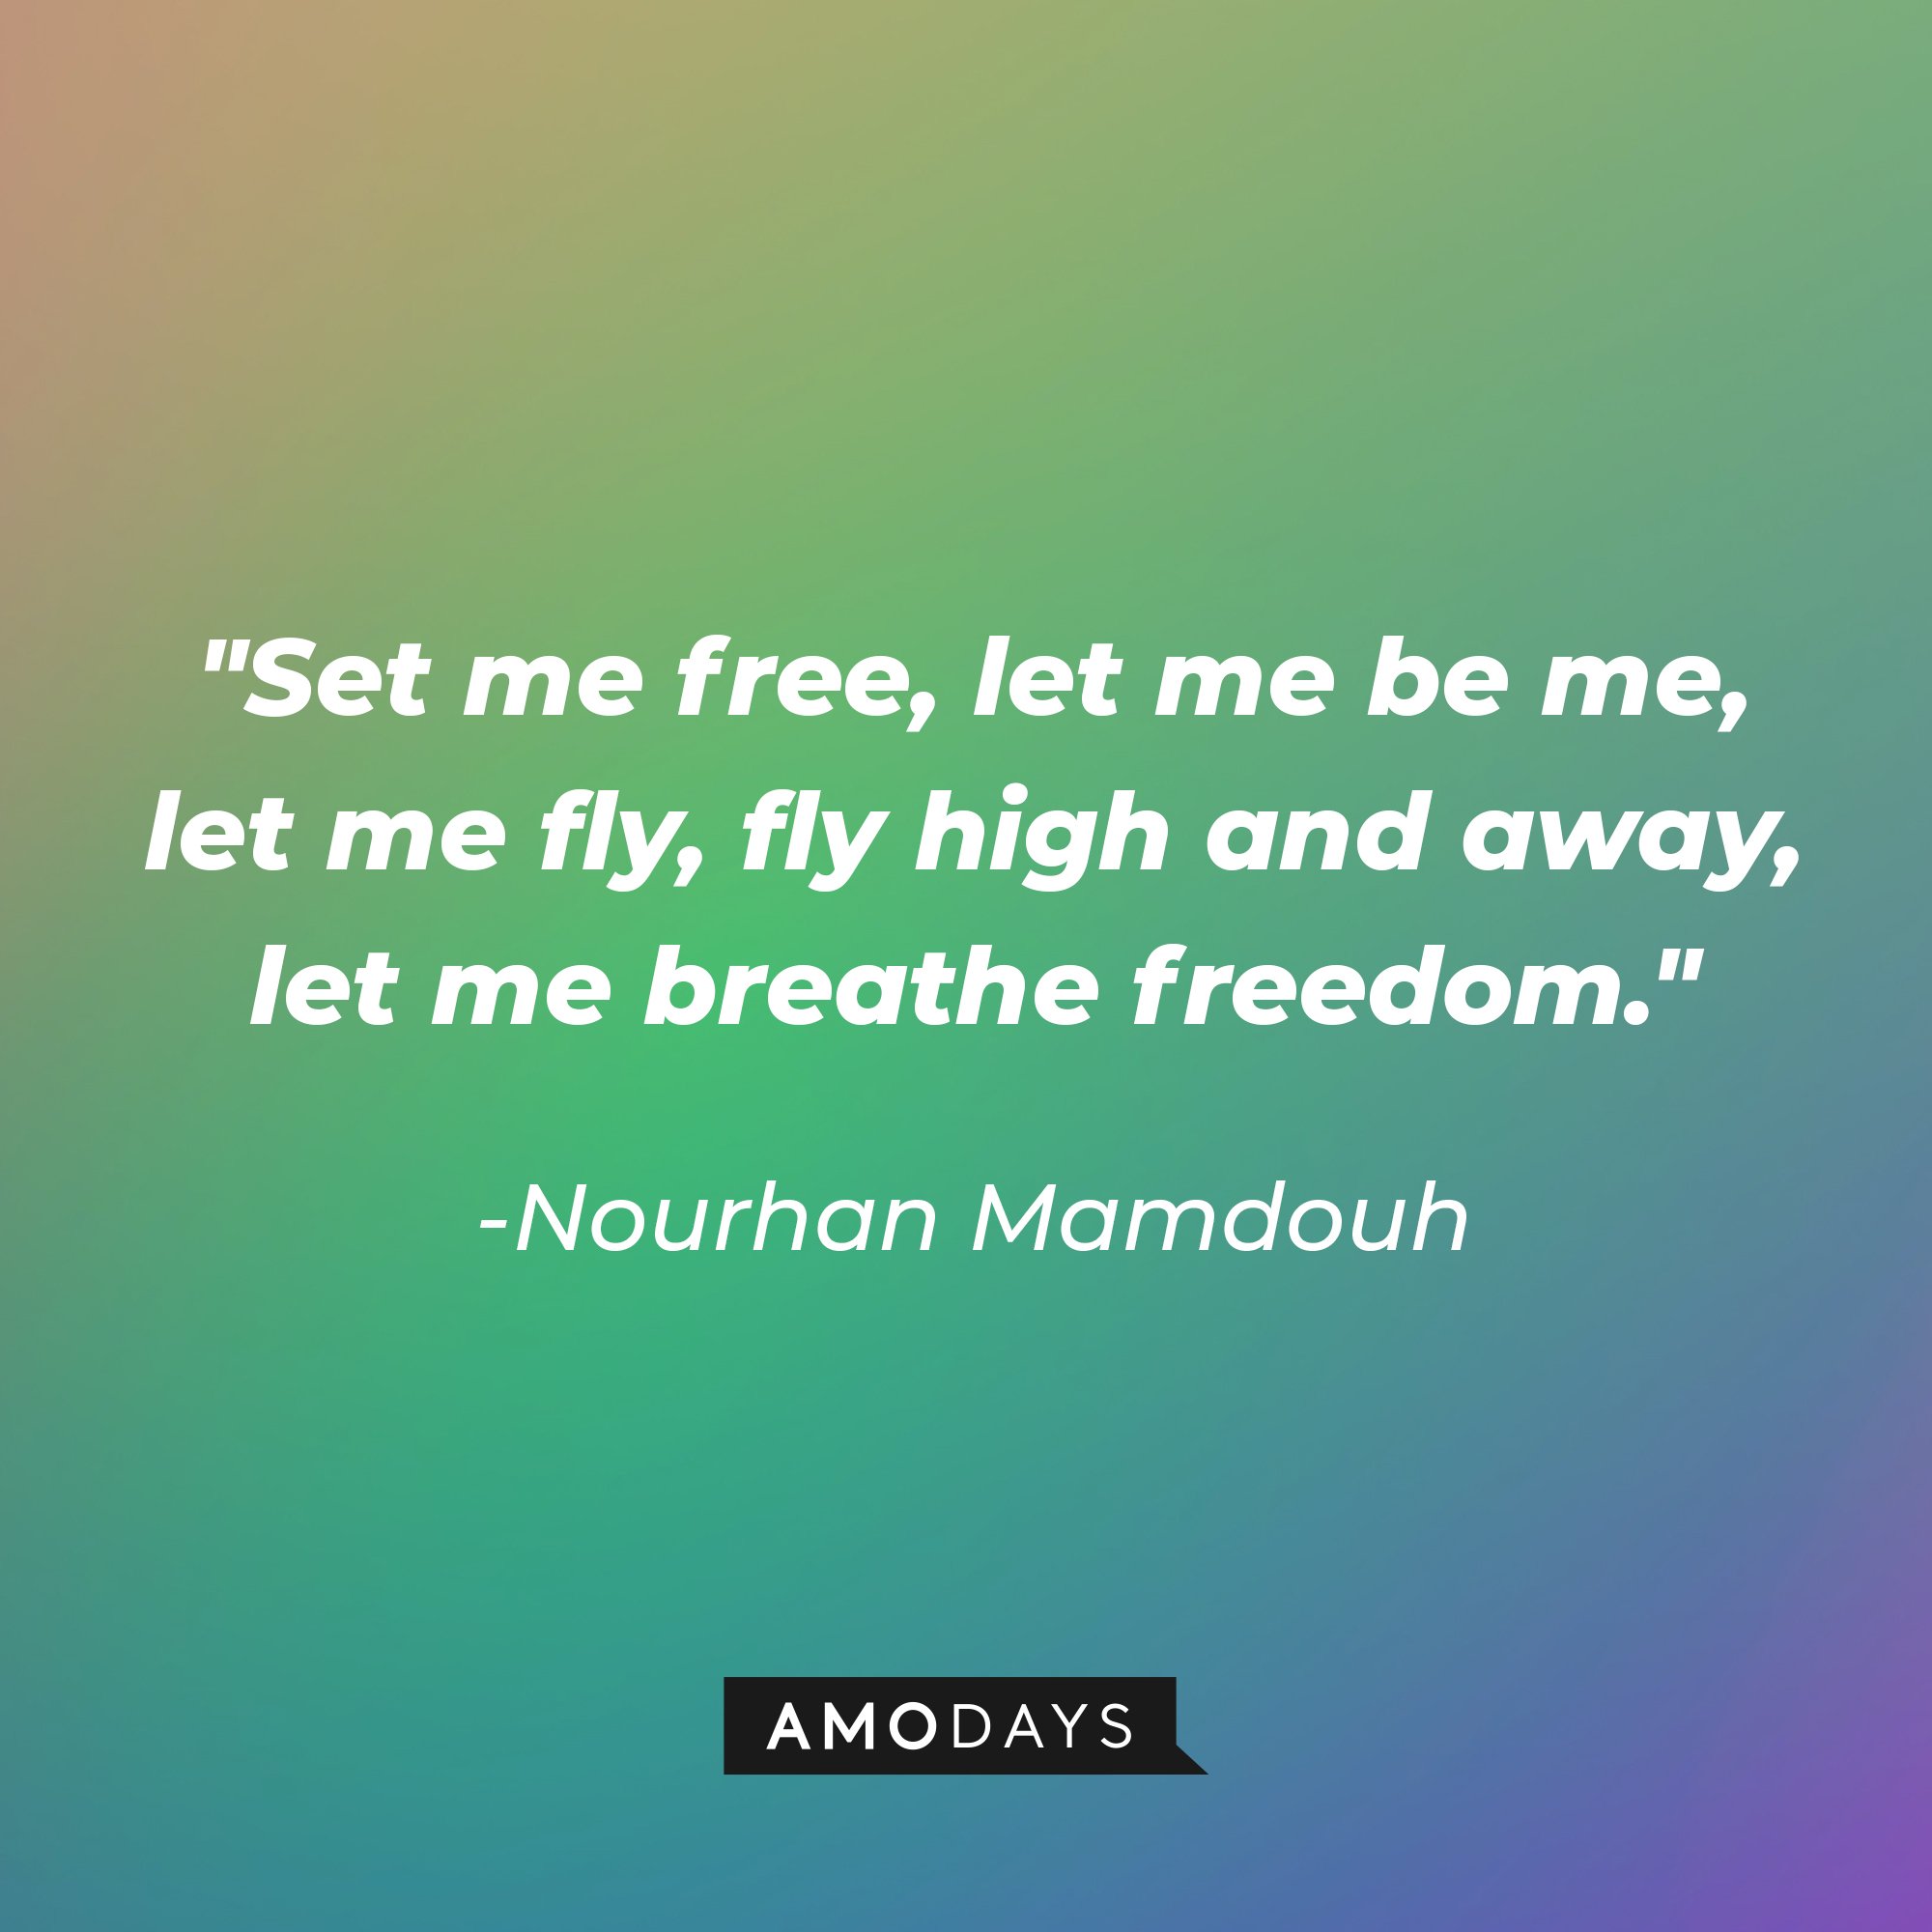 Nourhan Mamdouh’s quote: "Set me free, let me be me, let me fly, fly high and away, let me breathe freedom.” | Image: AmoDays